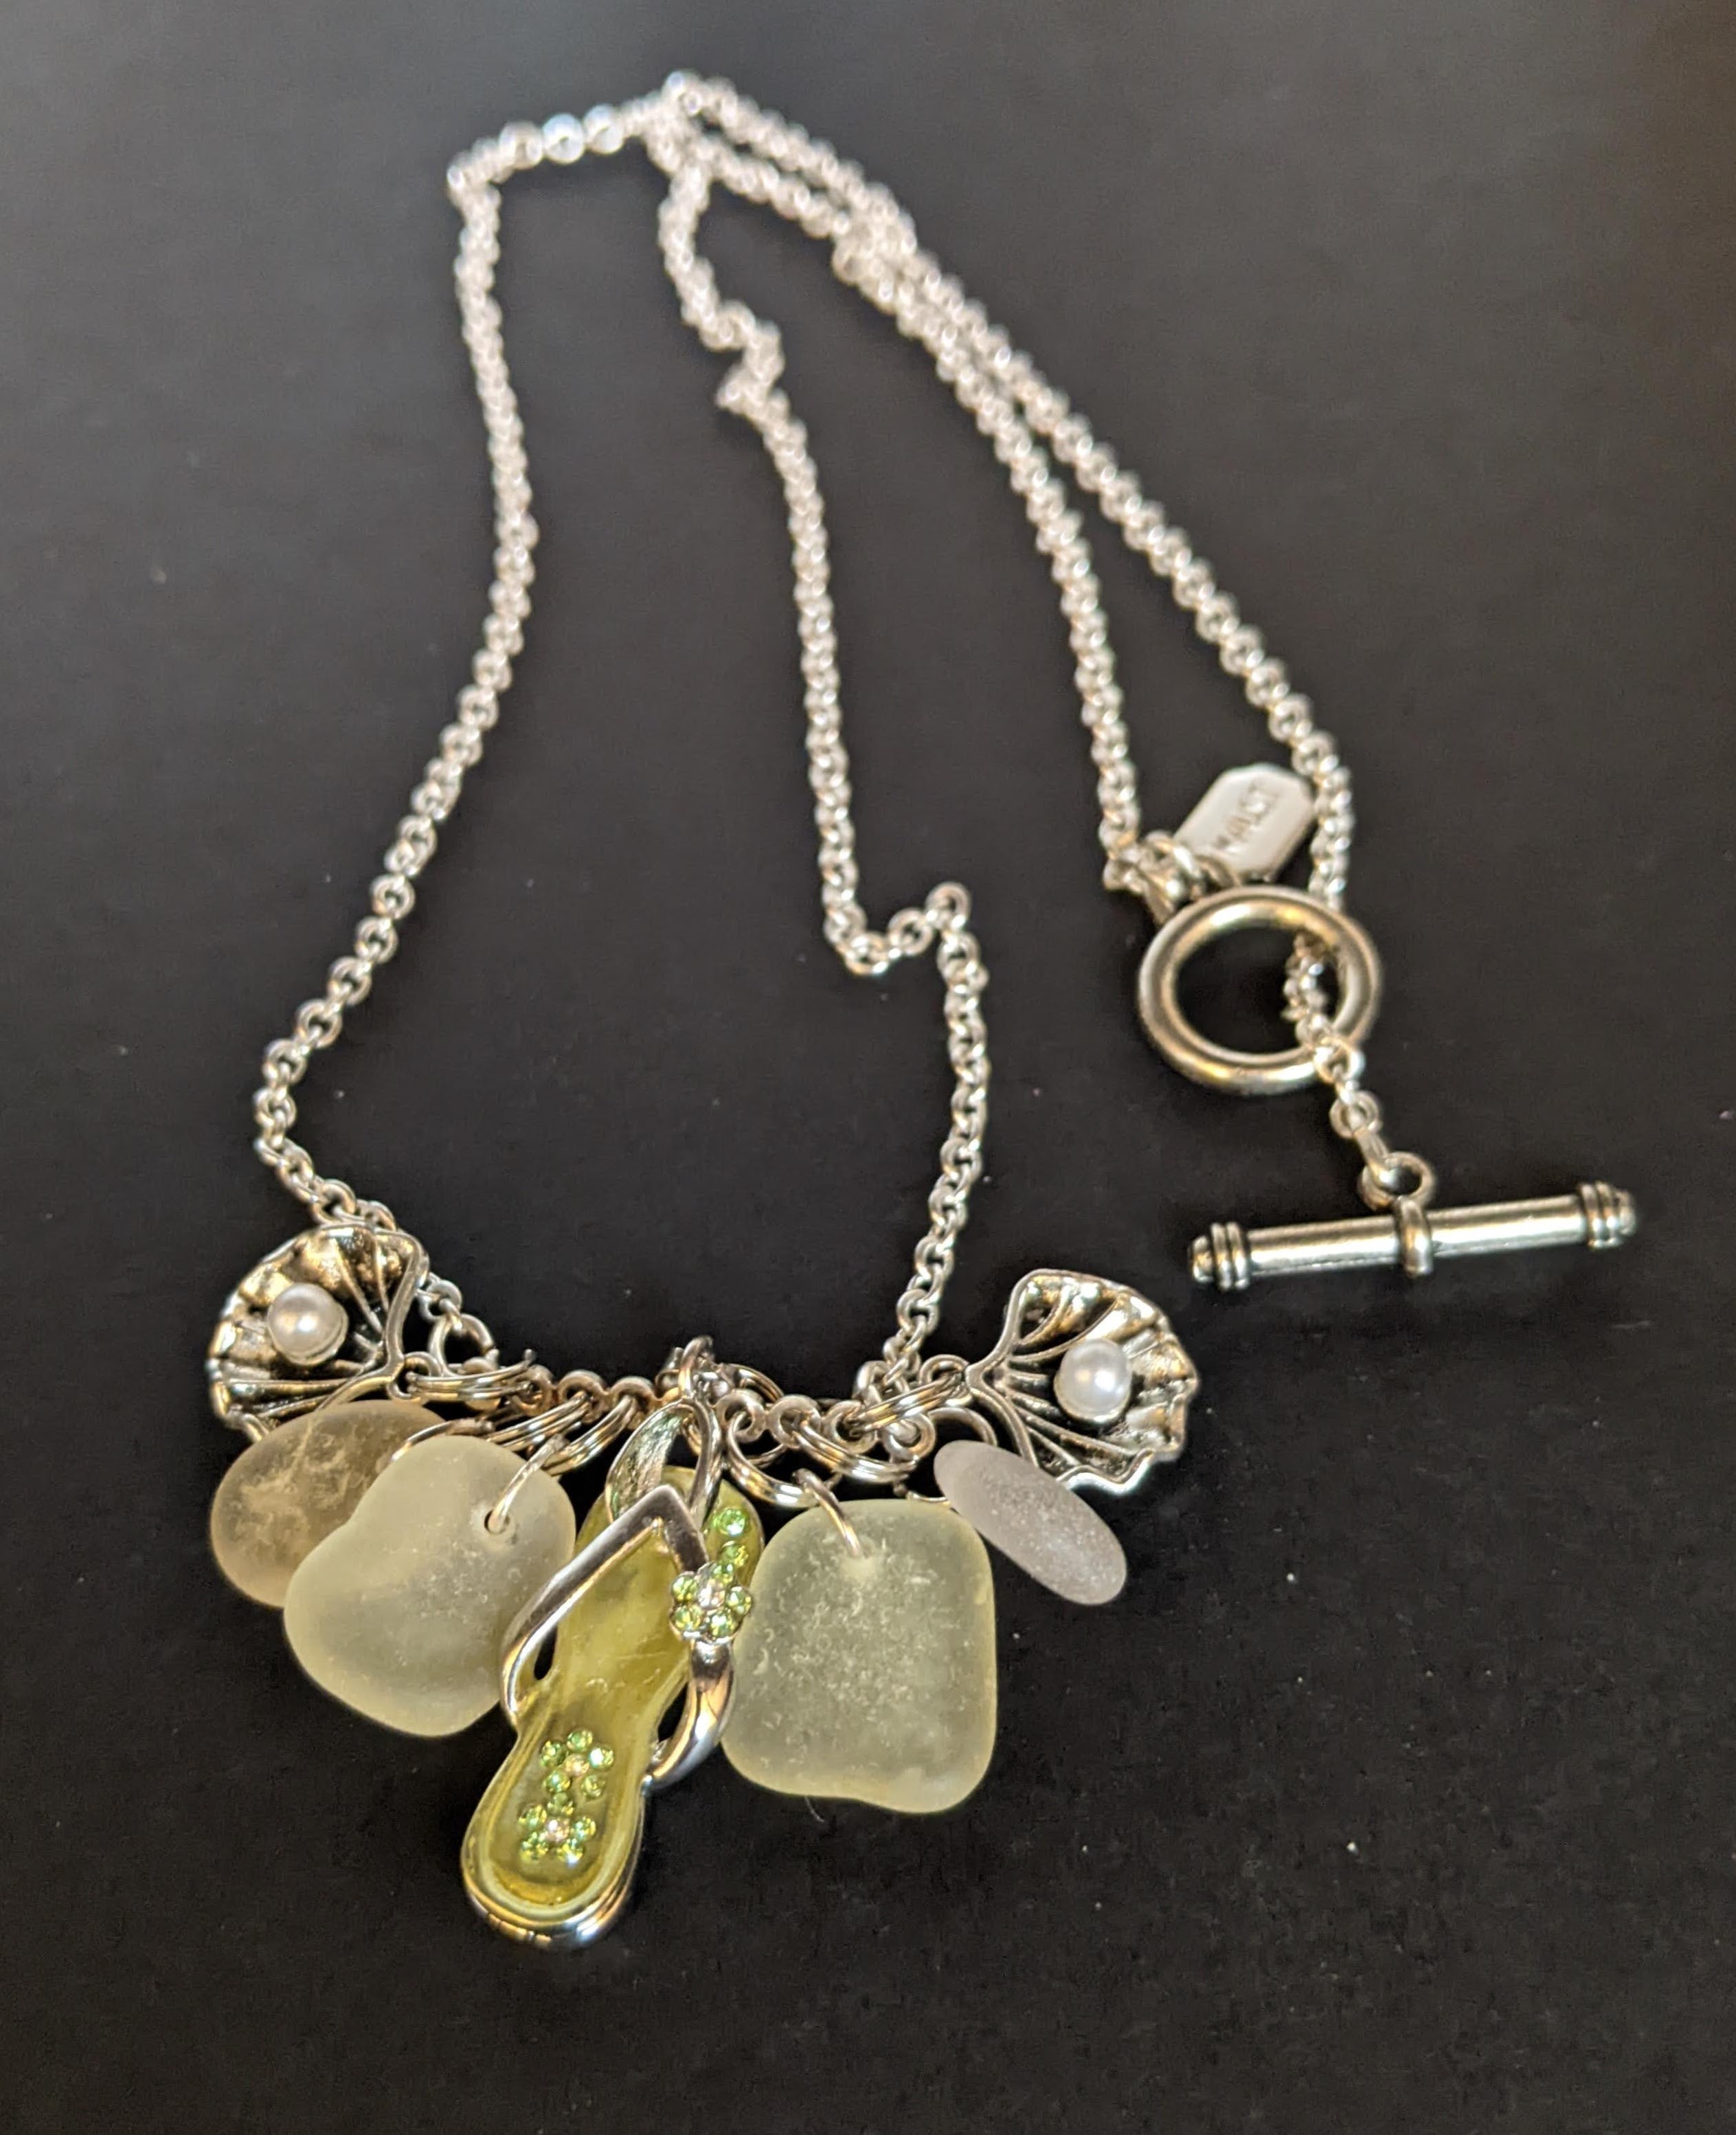 Flip-flop and seaglass necklace